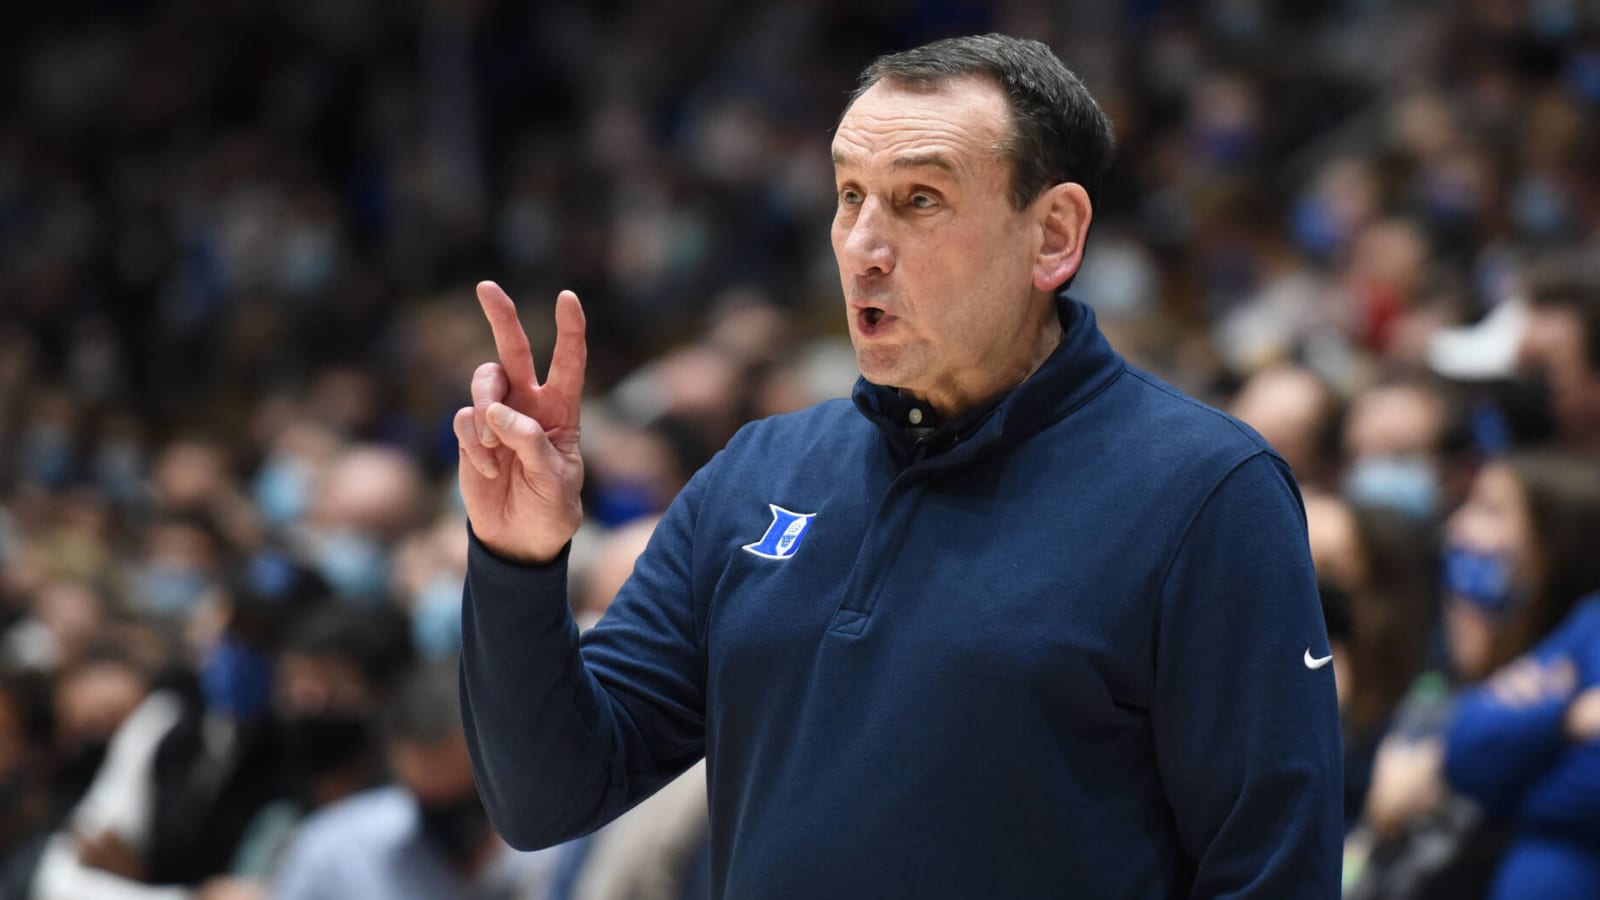 Coach K misses second half against Wake Forest due to illness